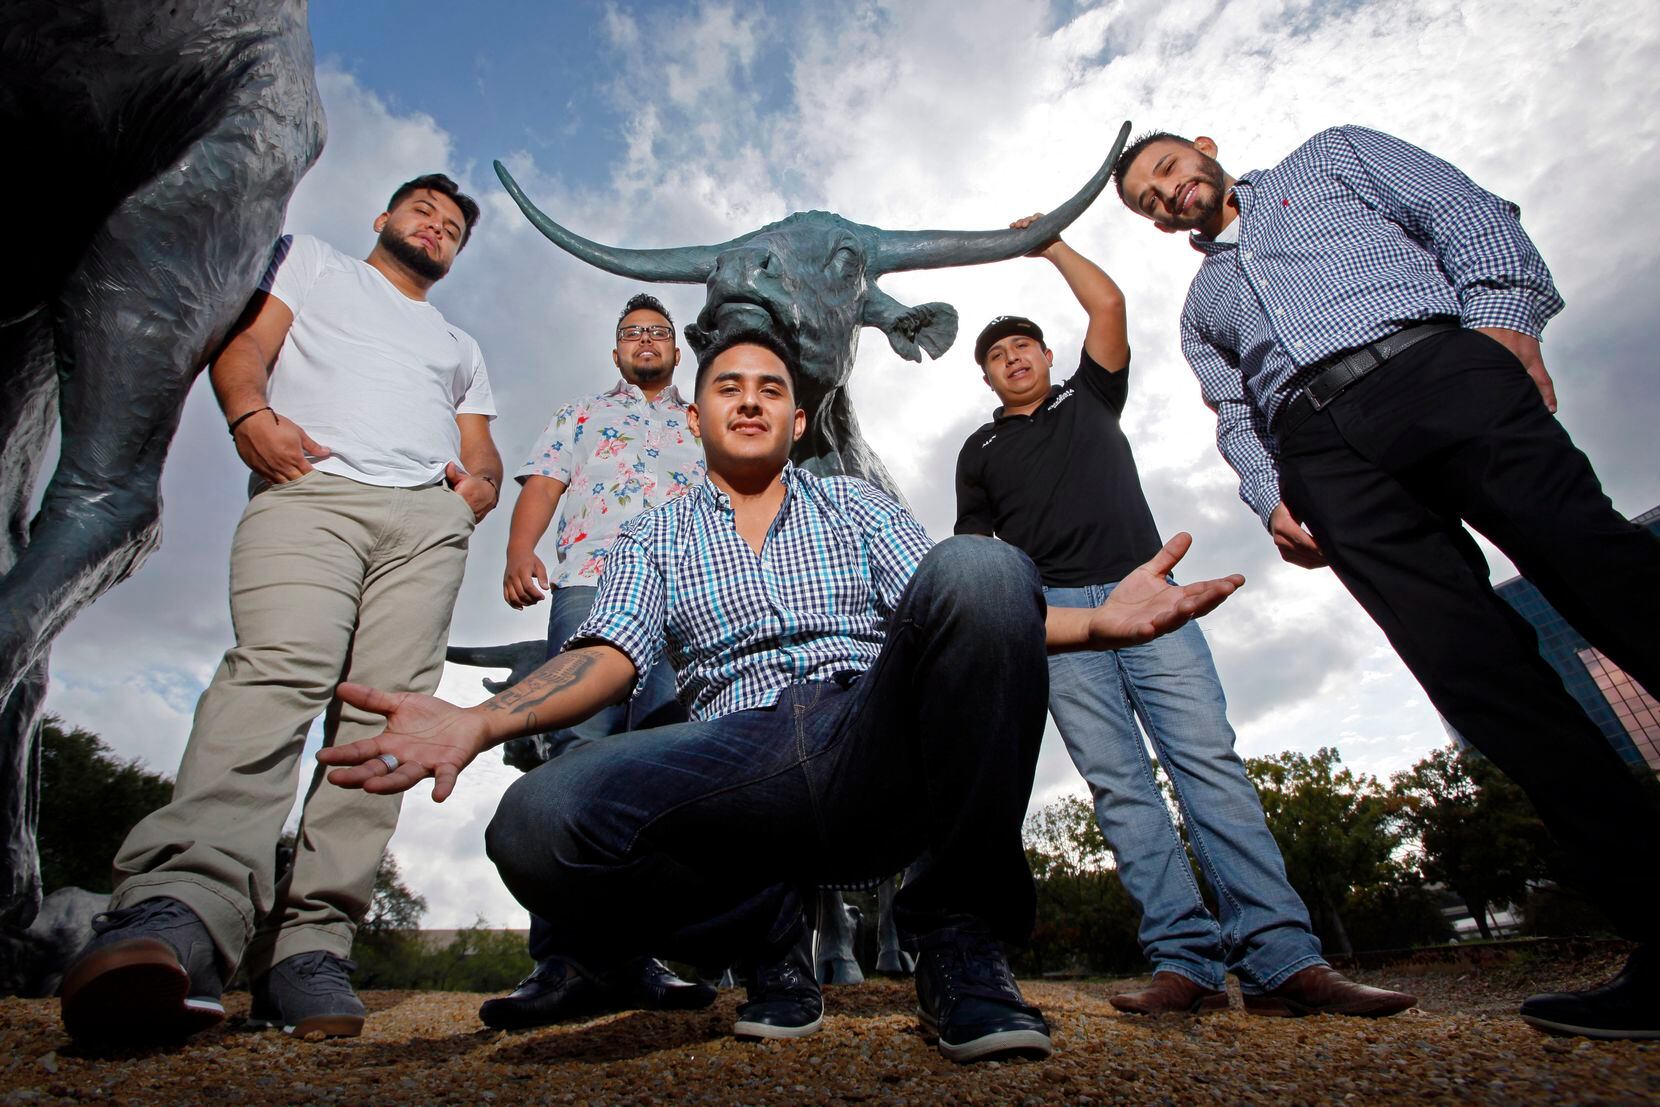 From left to right, Mike Lopez, Adrian Zamarripa, Moises Cuevas, Alex Mu–iz and Israel Oviedo, of the Latin music group La Energia Norteña on Wednesday, Nov. 04, 2015 in Downtown Dallas.